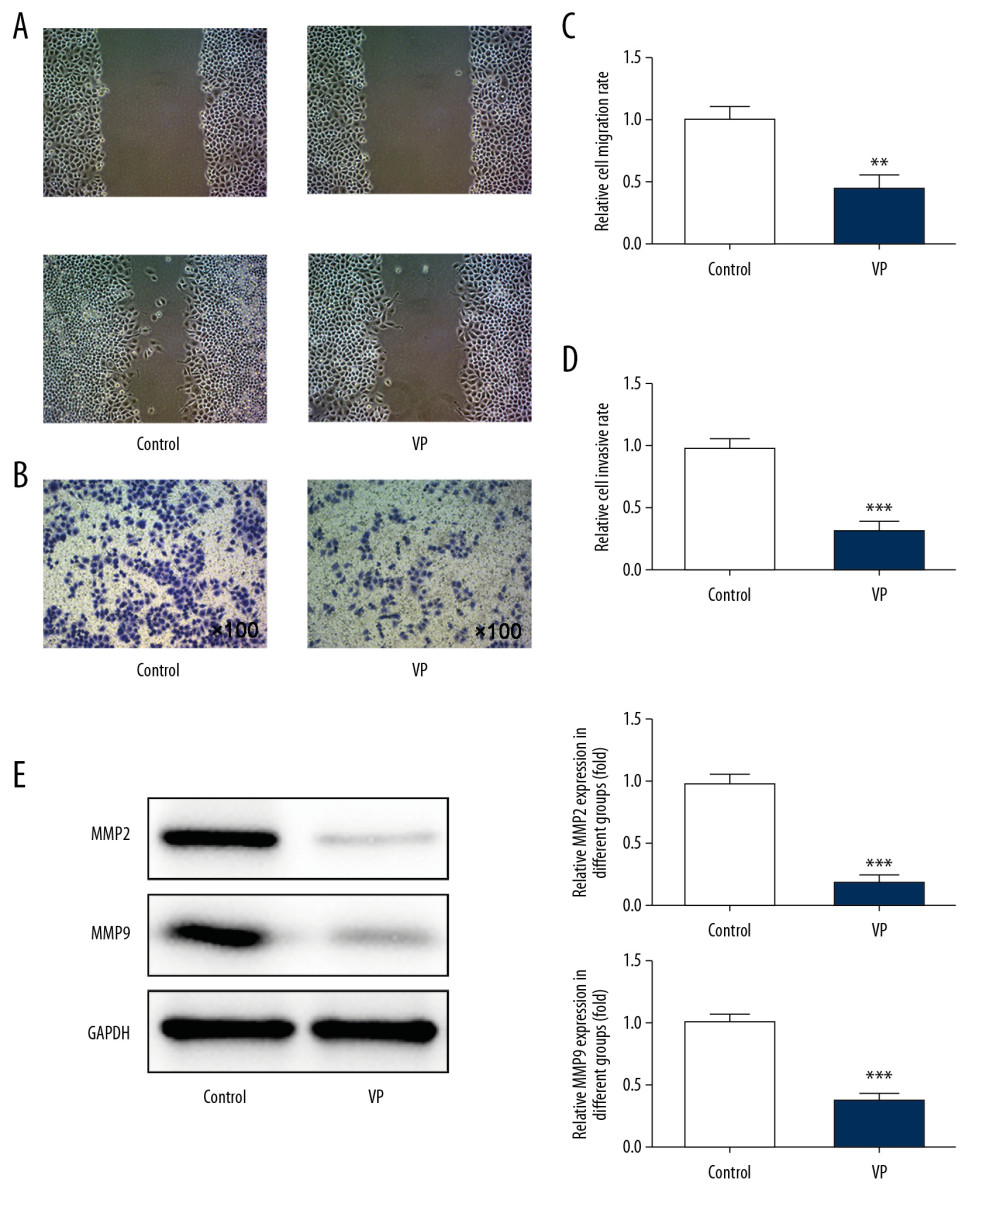 Verteporfin (VP) inhibited the migration and invasion of cervical cancer cells. (A, C) The migration of HeLa cells treated with 5 μM VP was analyzed by wound healing assay. ** P<0.01 vs. Control group. (B, D) The migration of HeLa cells treated with 5 μM VP was analyzed by transwell assay. *** P<0.001 vs. Control group. (E) The expression of MMP2 and MMP9 in HeLa cells treated with 5 μM VP was determined by western blot analysis. *** P<0.001 vs. Control group.